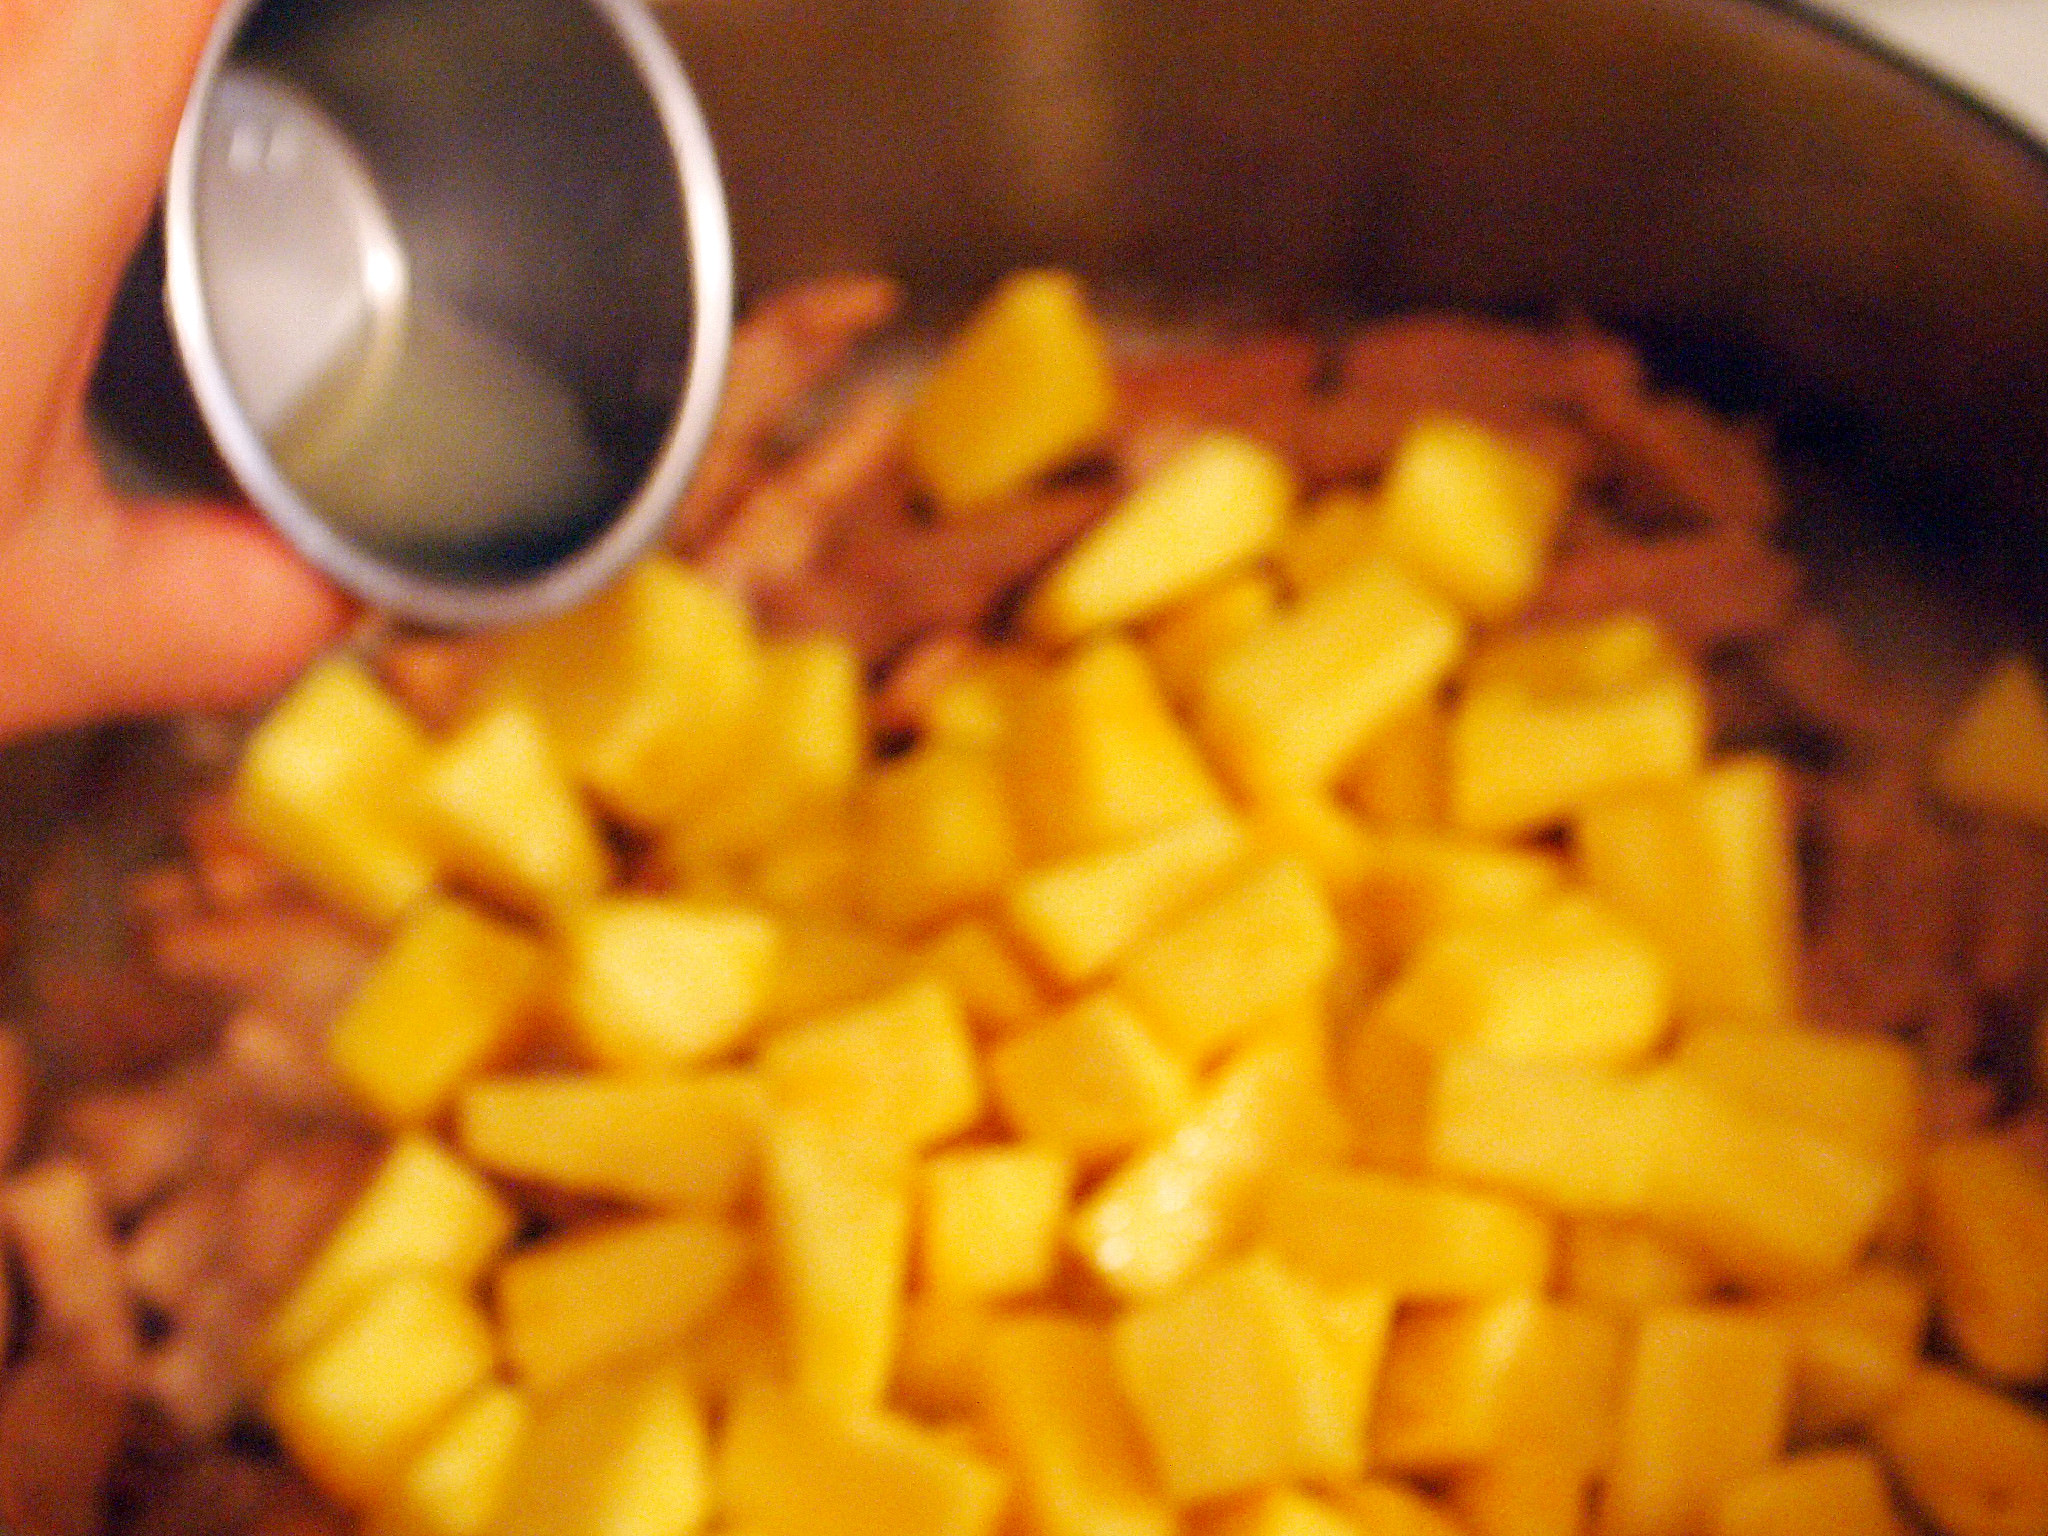 blurry cooking shot